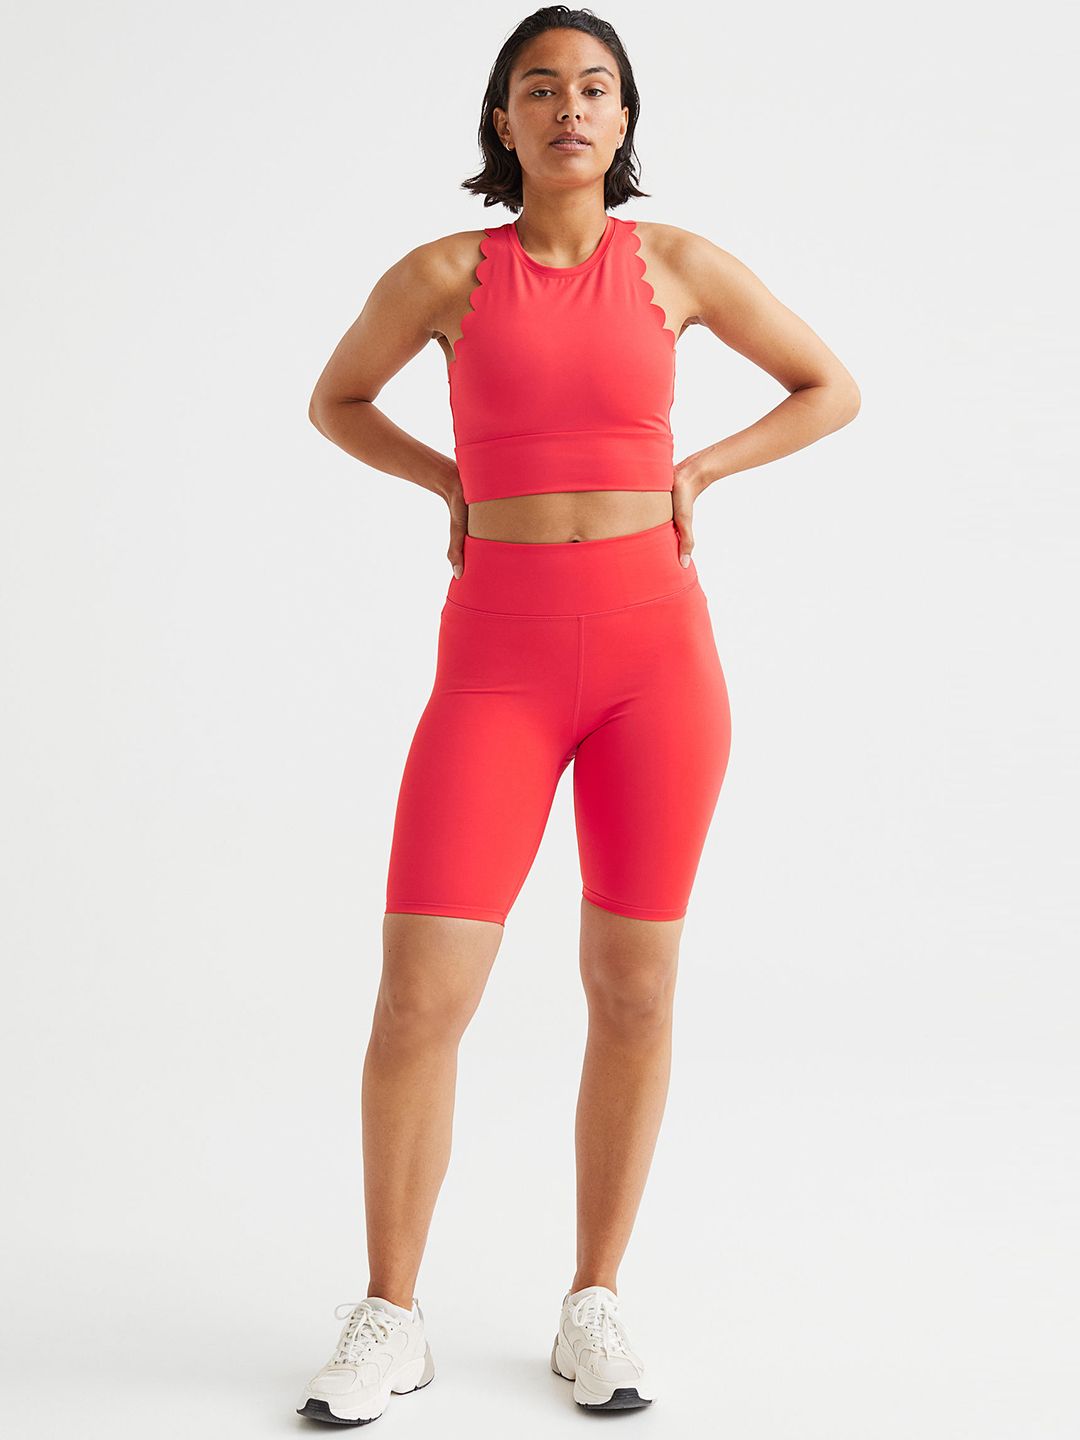 H&M Women Red Sports Cycling Shorts Price in India